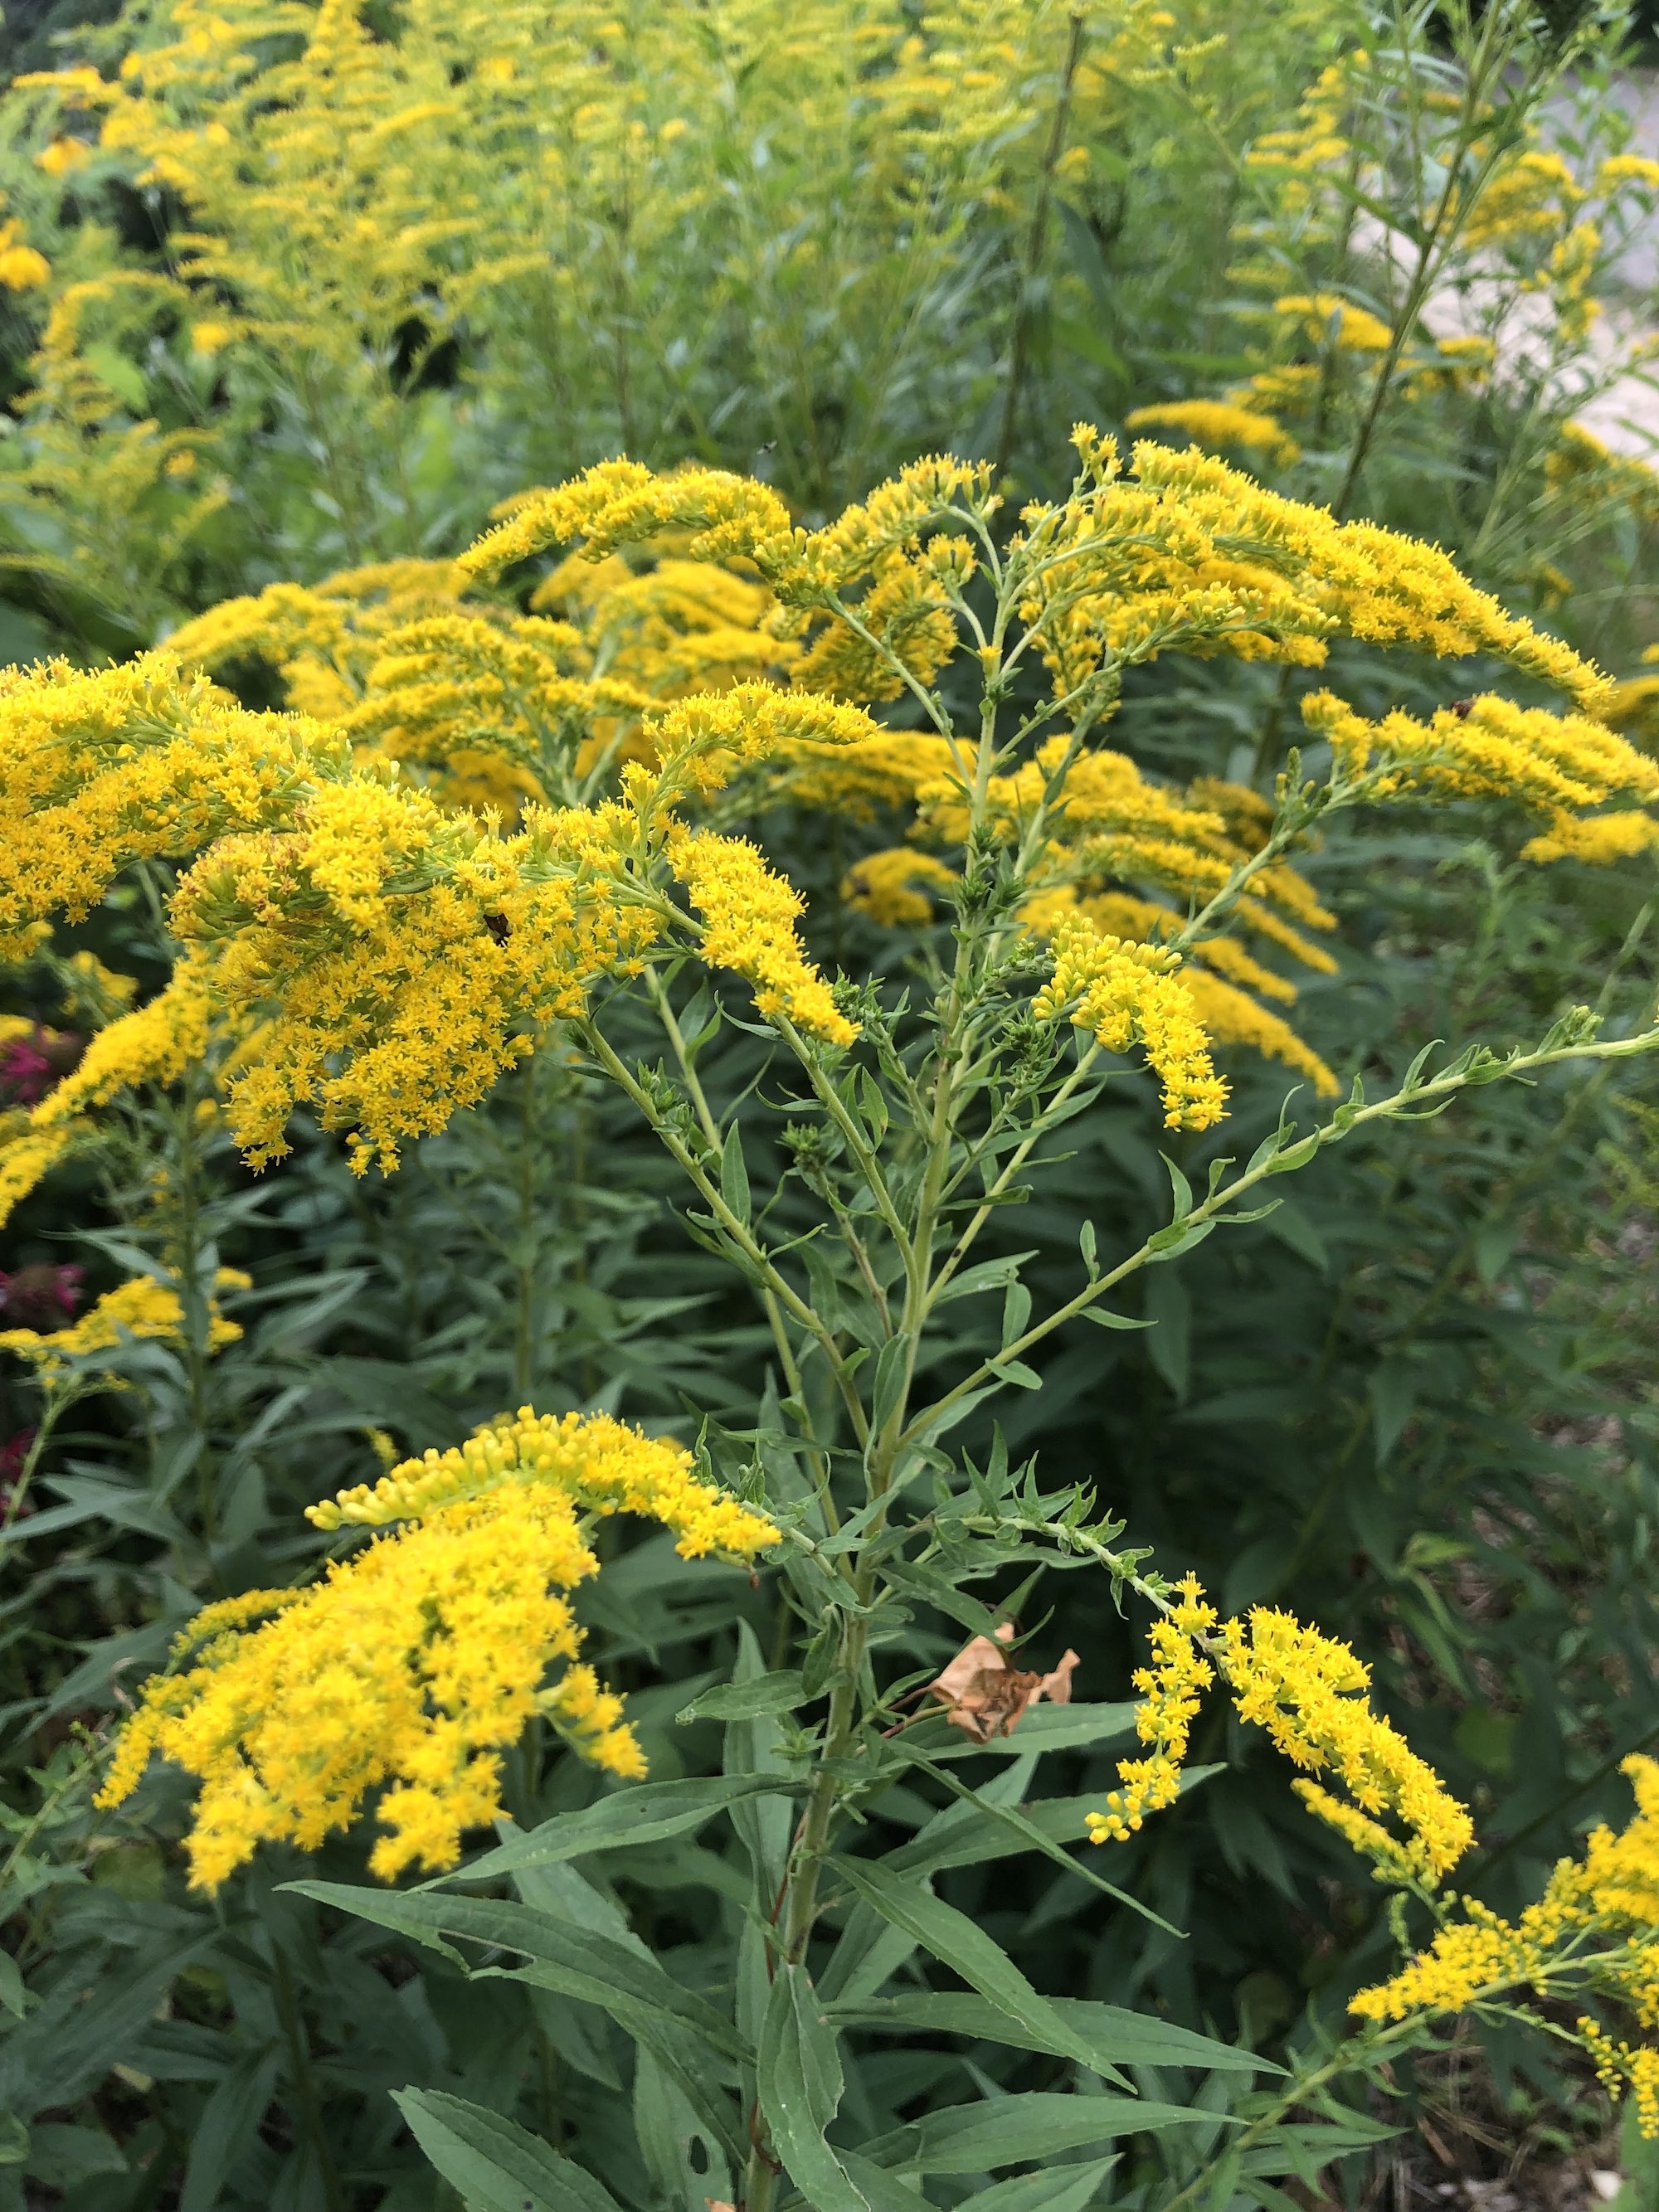 Early Goldenrod along bike path behind Gregory Street in Madison, Wisconsin on July 31, 2021.